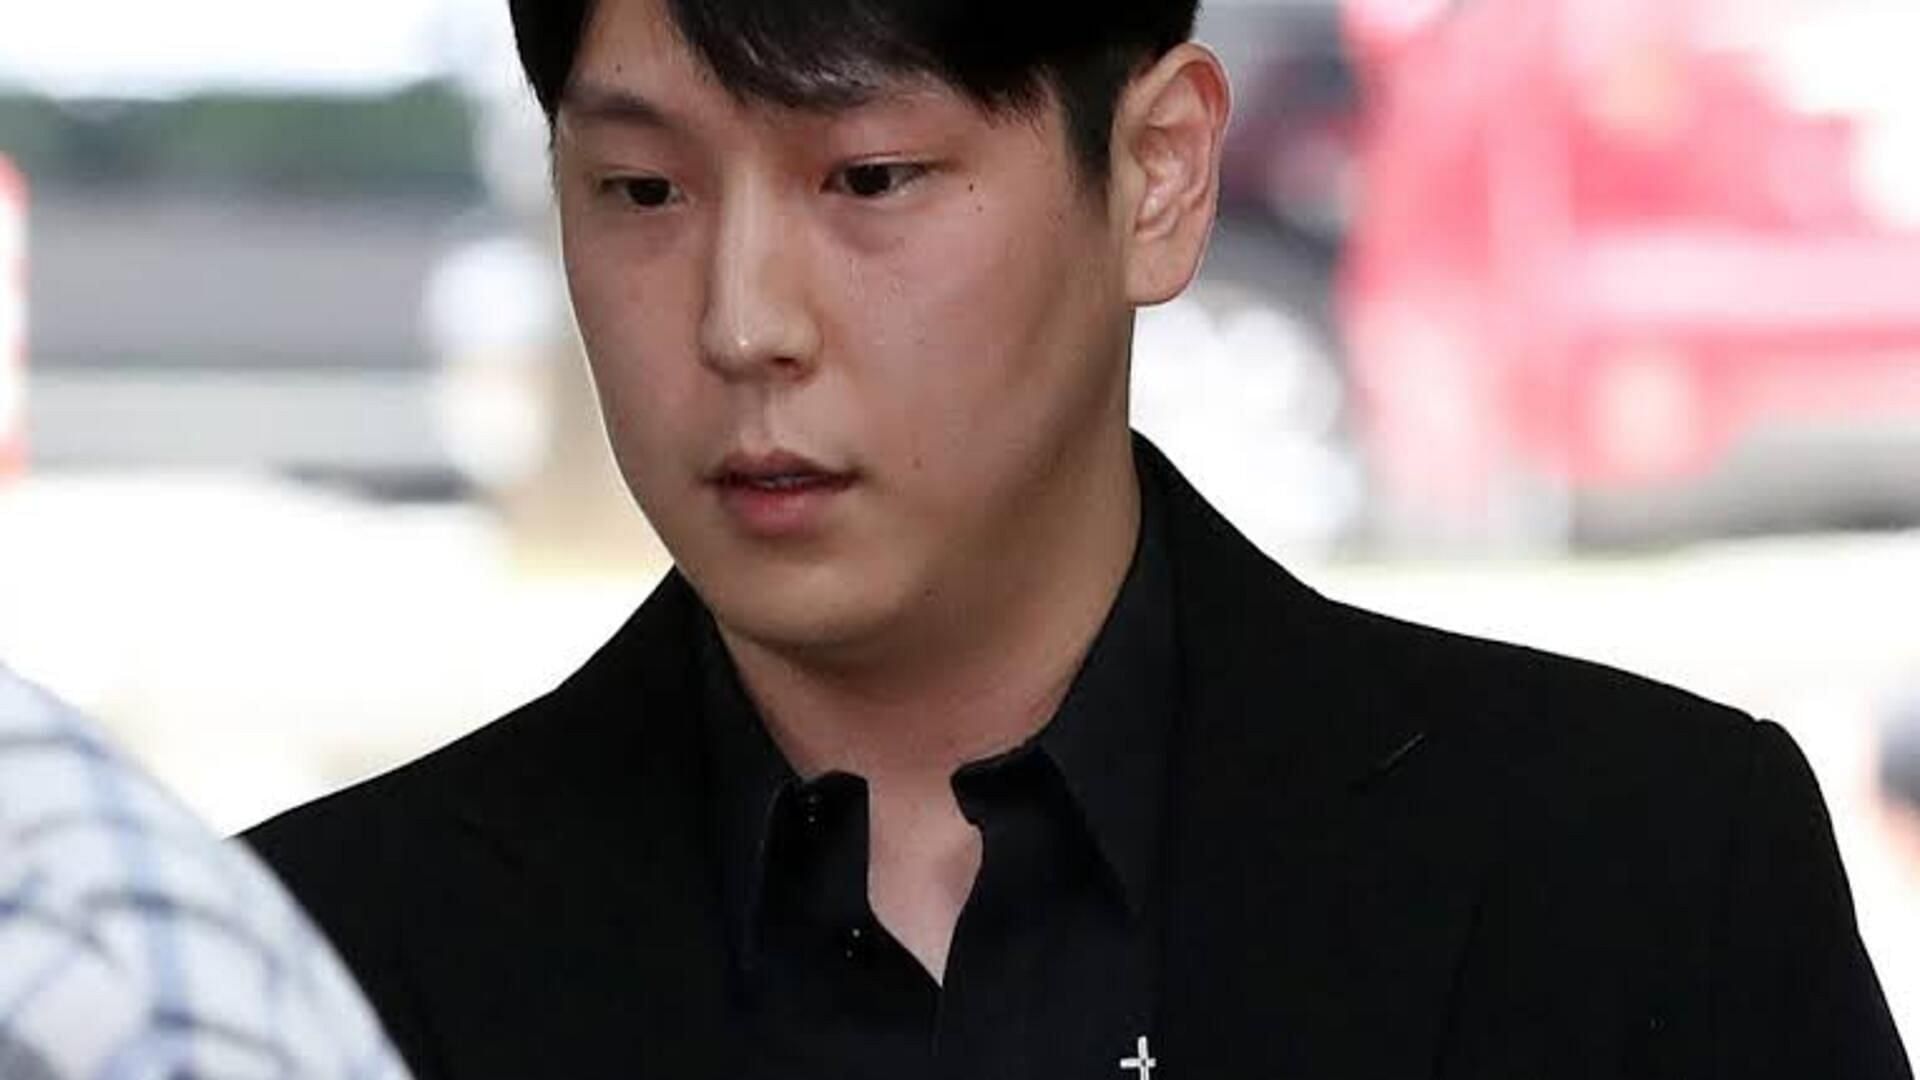 Himchan was sentenced to 10 months in jail (Image via Twitter)